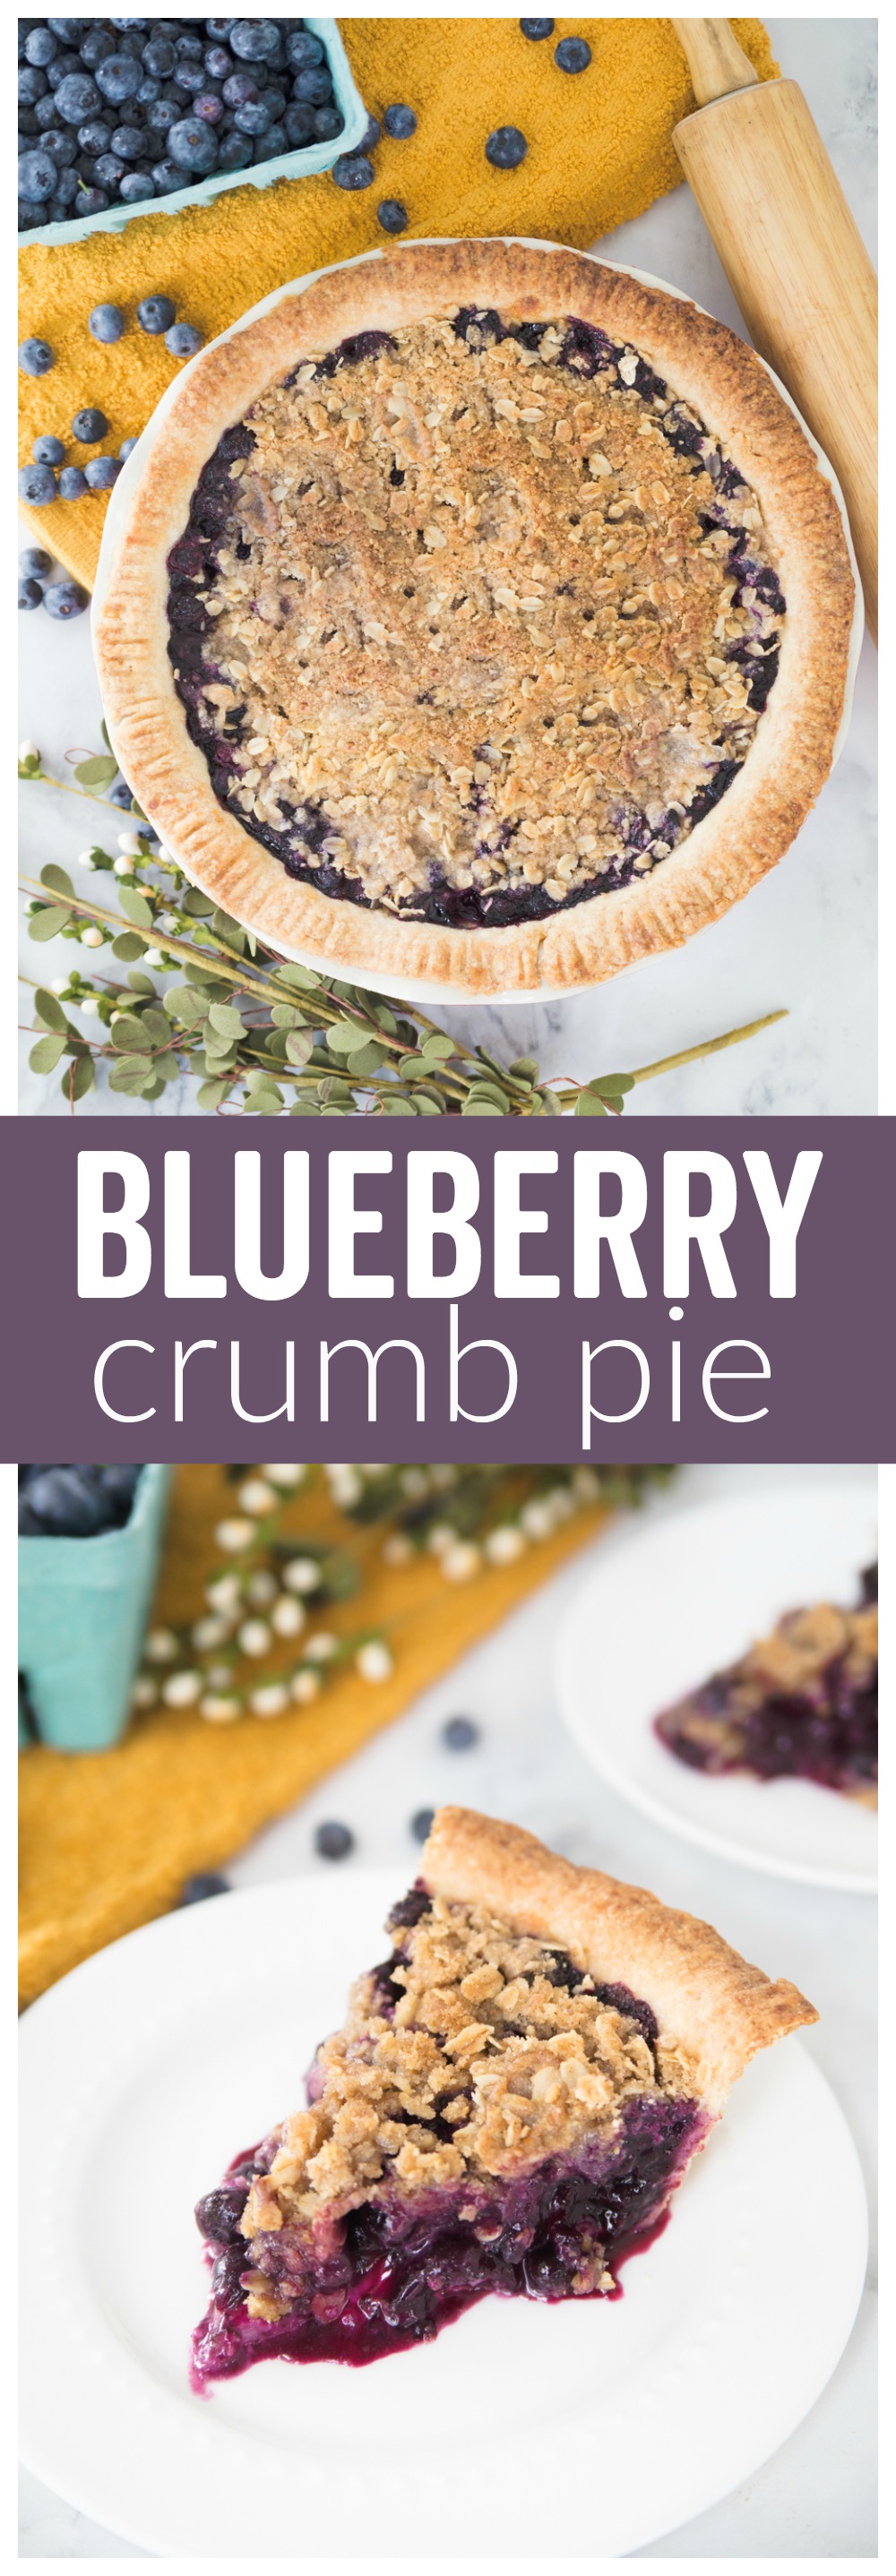 This Blueberry Crumb Pie is bursting with a sweet berry filling and topped with a crunchy crumb crust.  It's the perfect amount of crunch with the juicy berries.